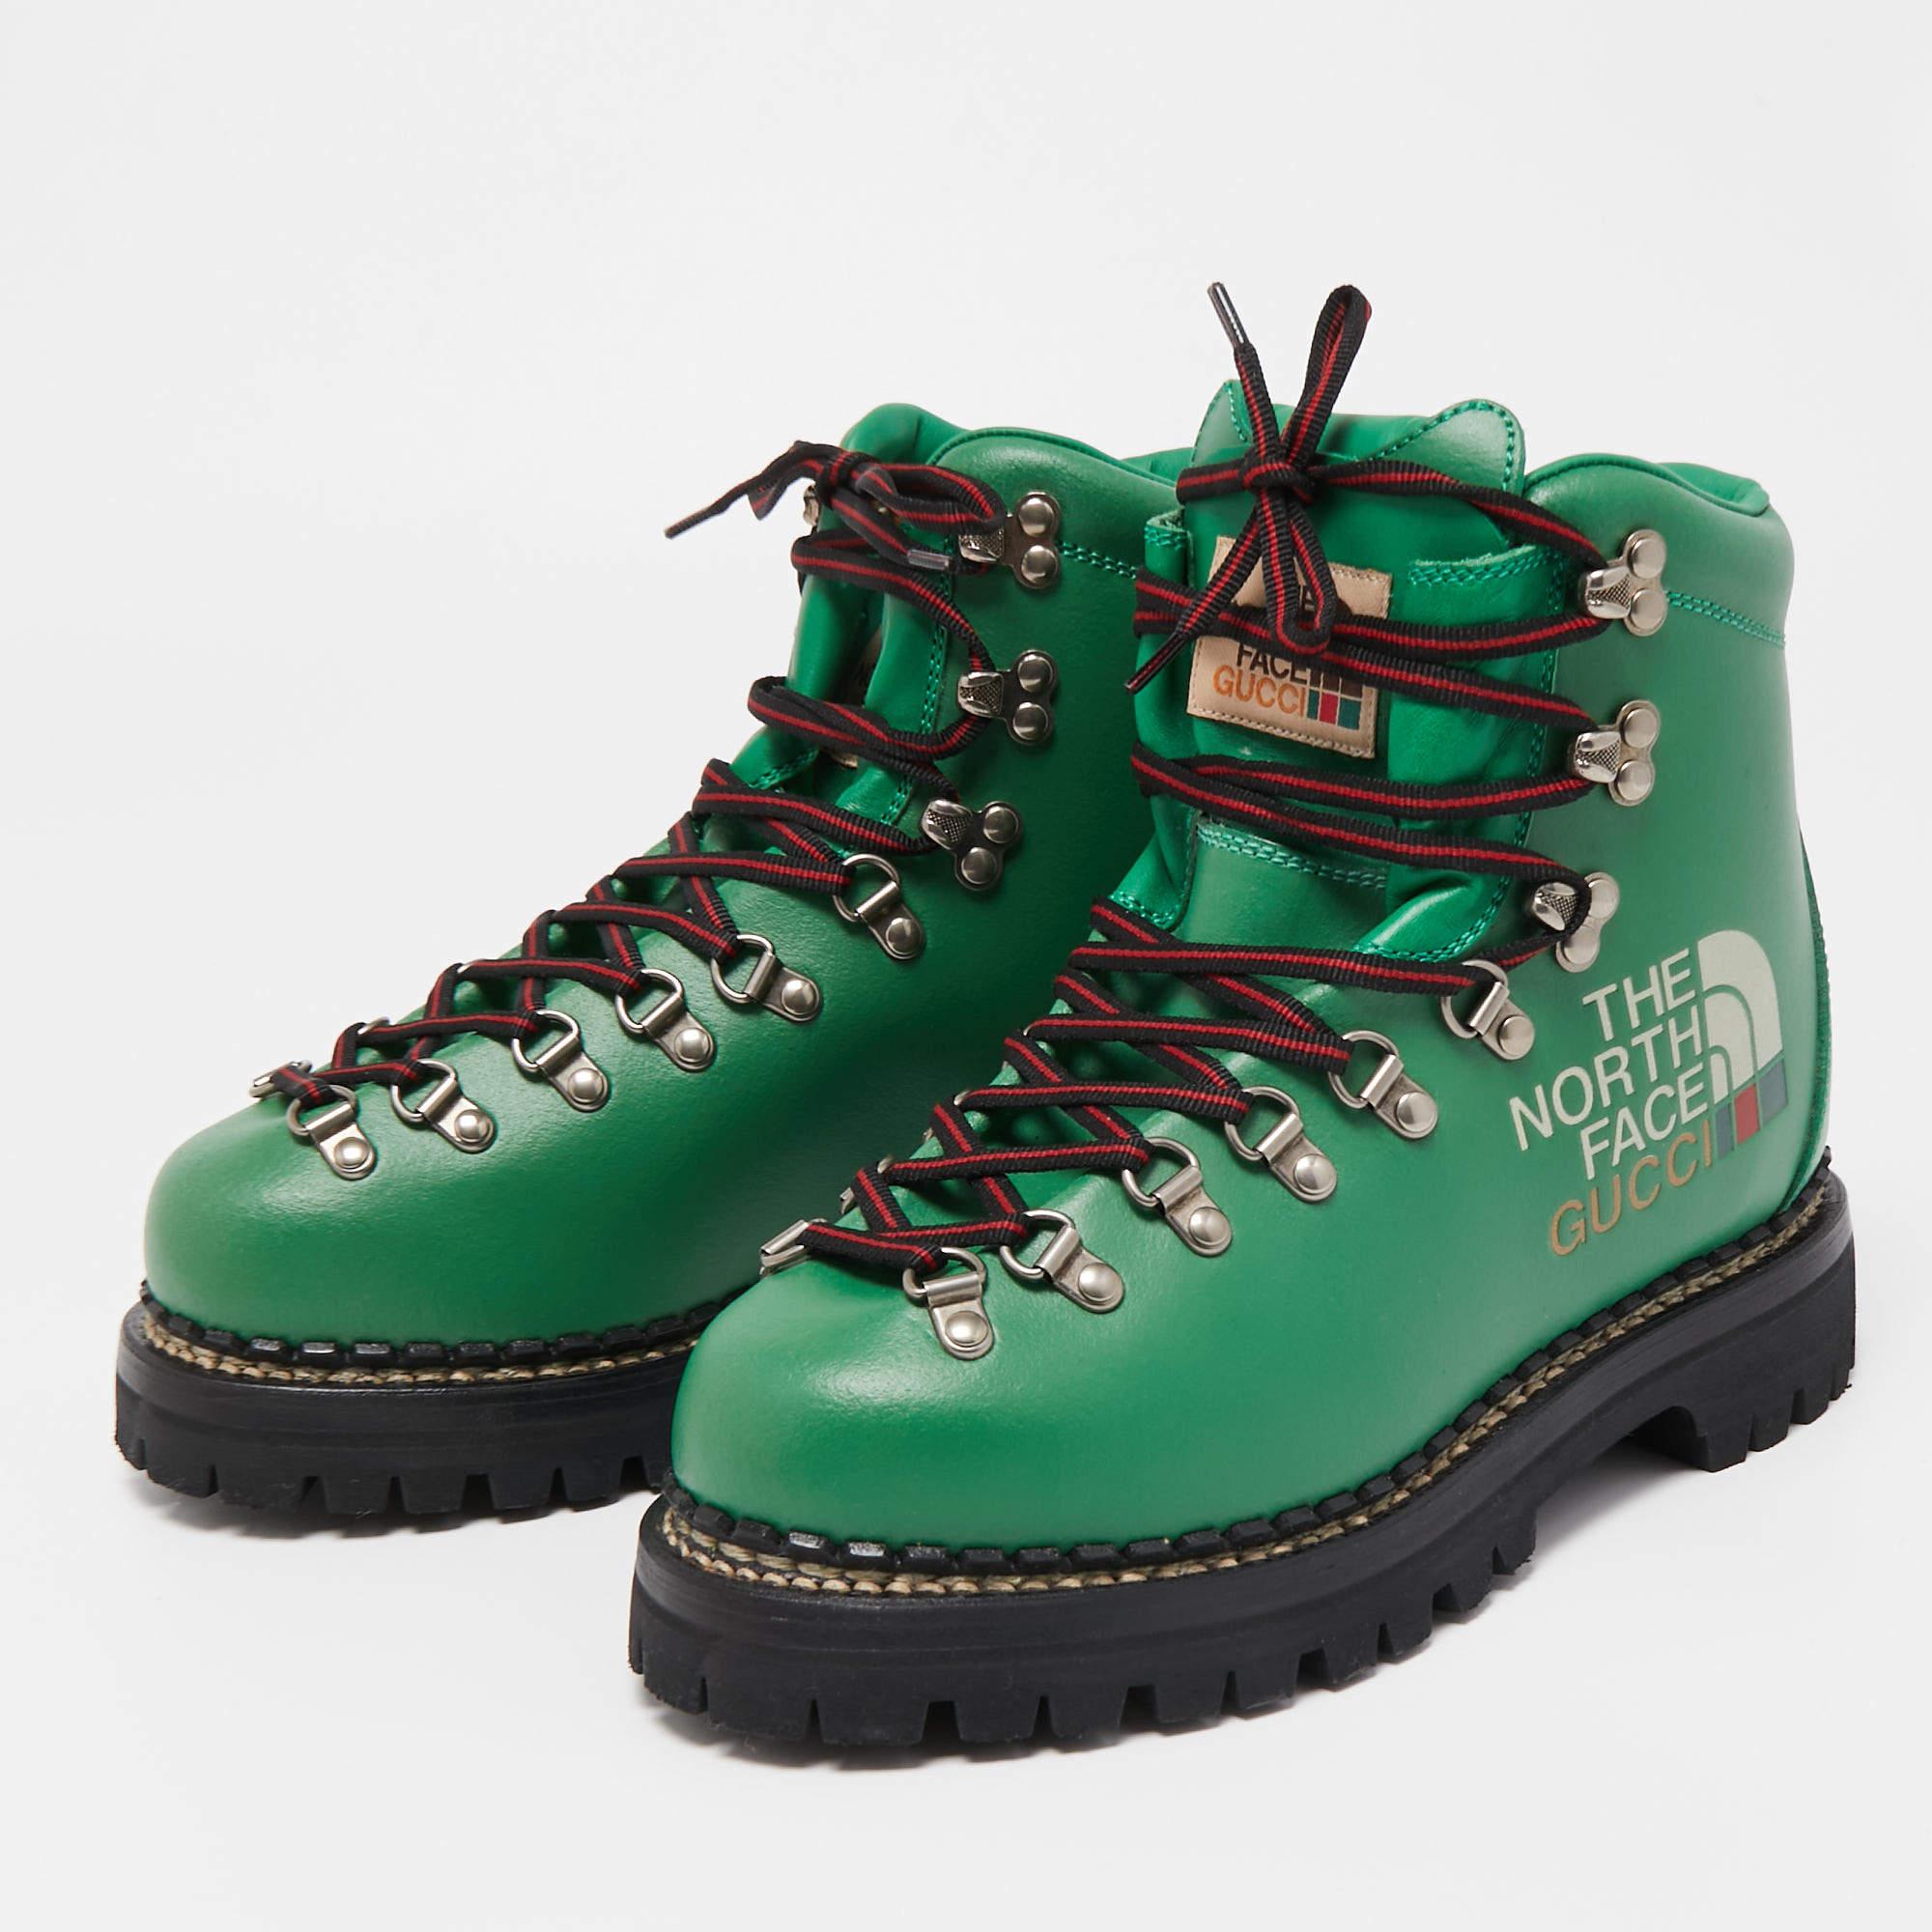 Gucci X The North Face Green Leather Lace-up Boots Size 38 4